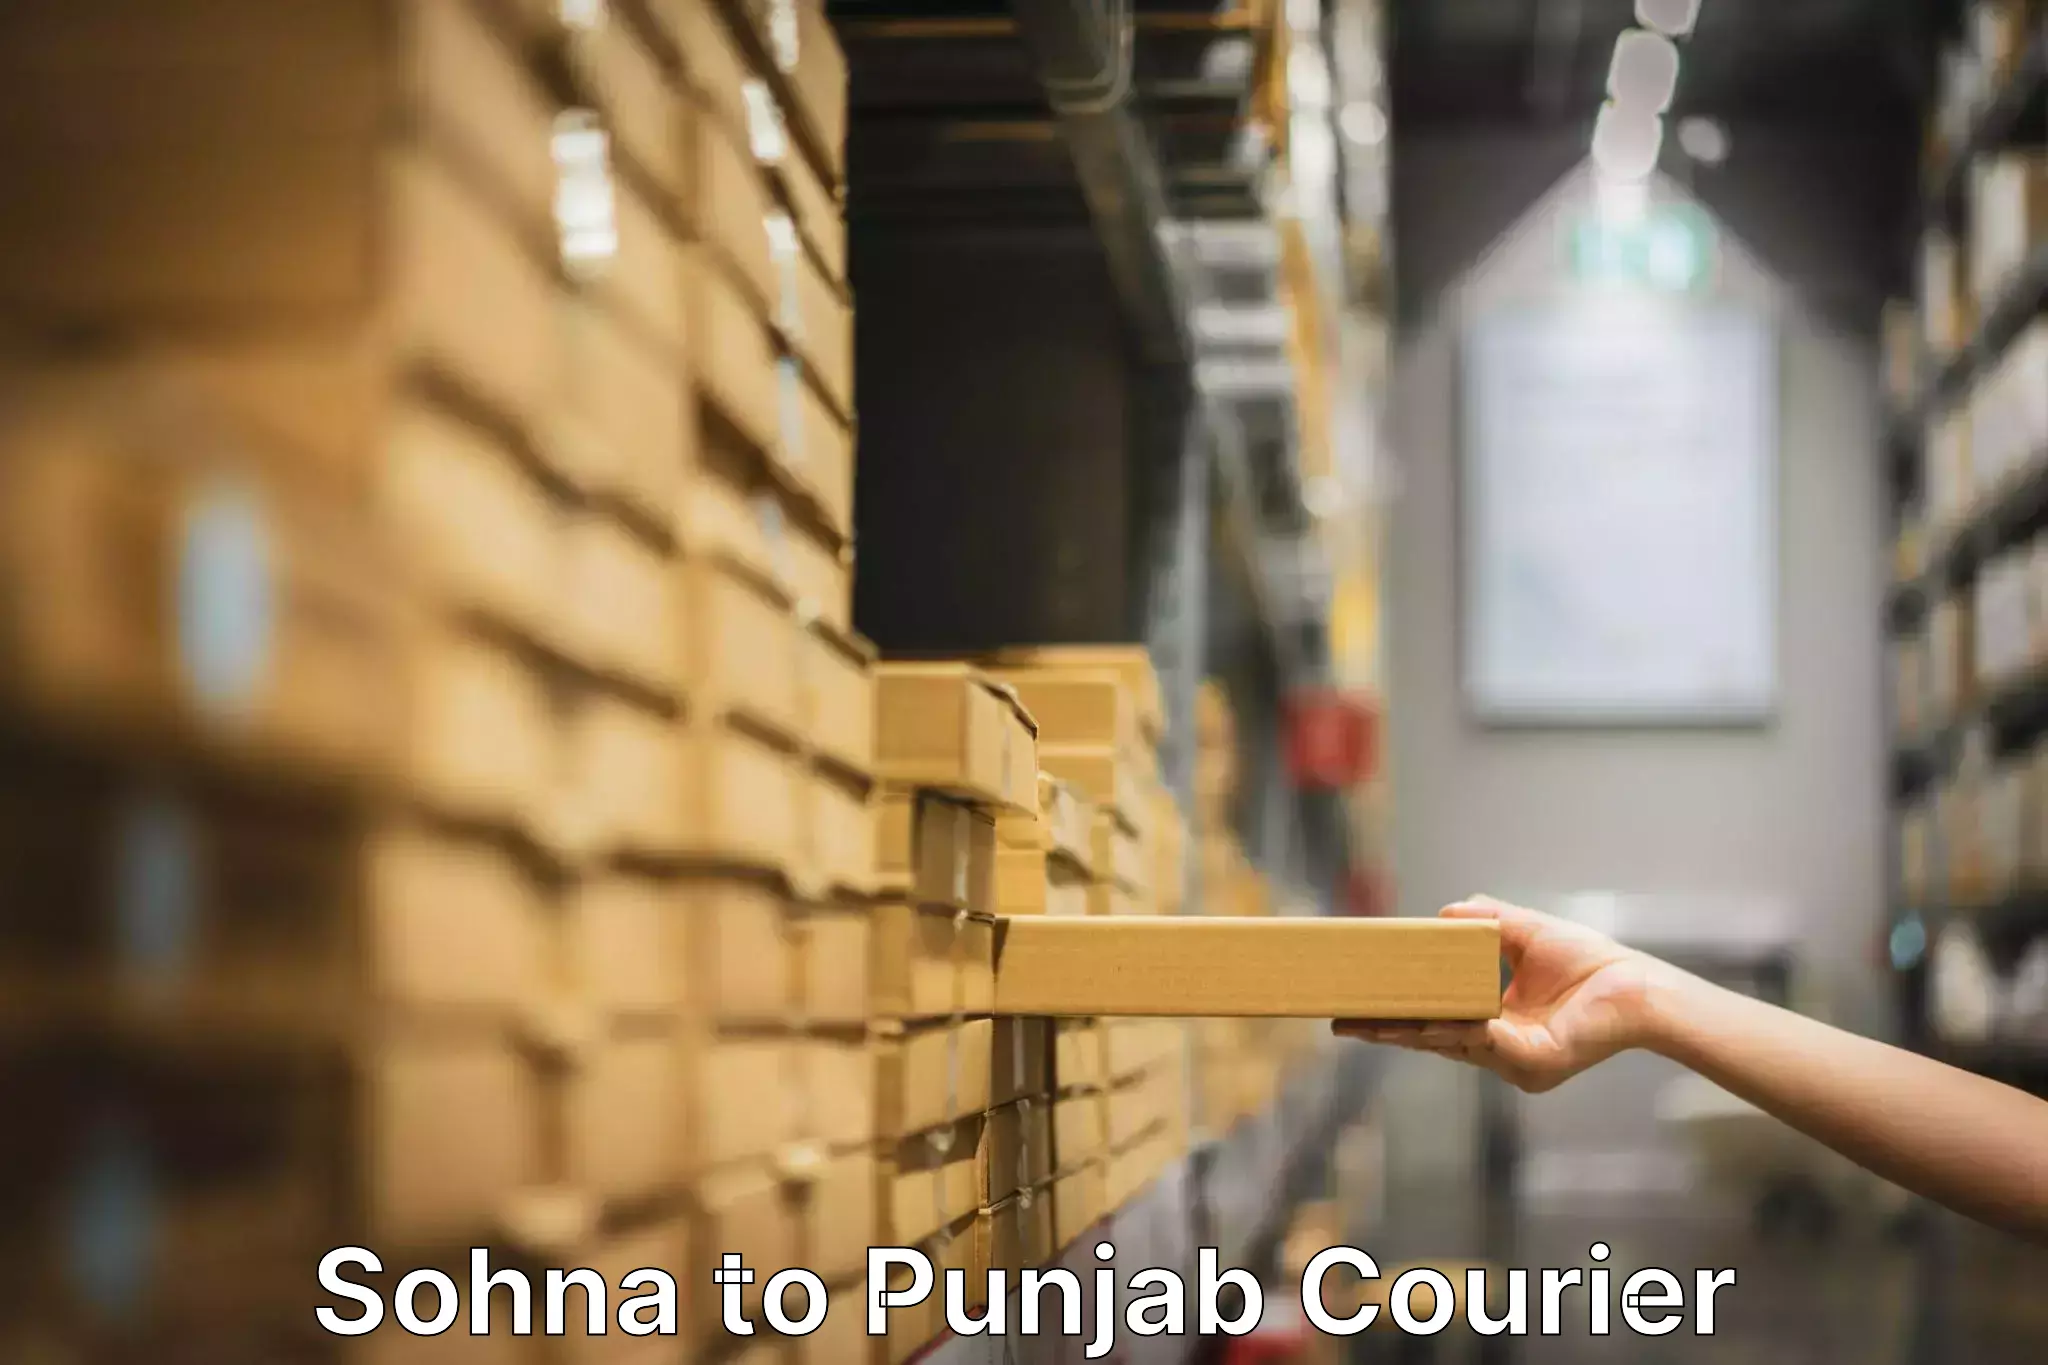 Quality relocation services Sohna to Zirakpur